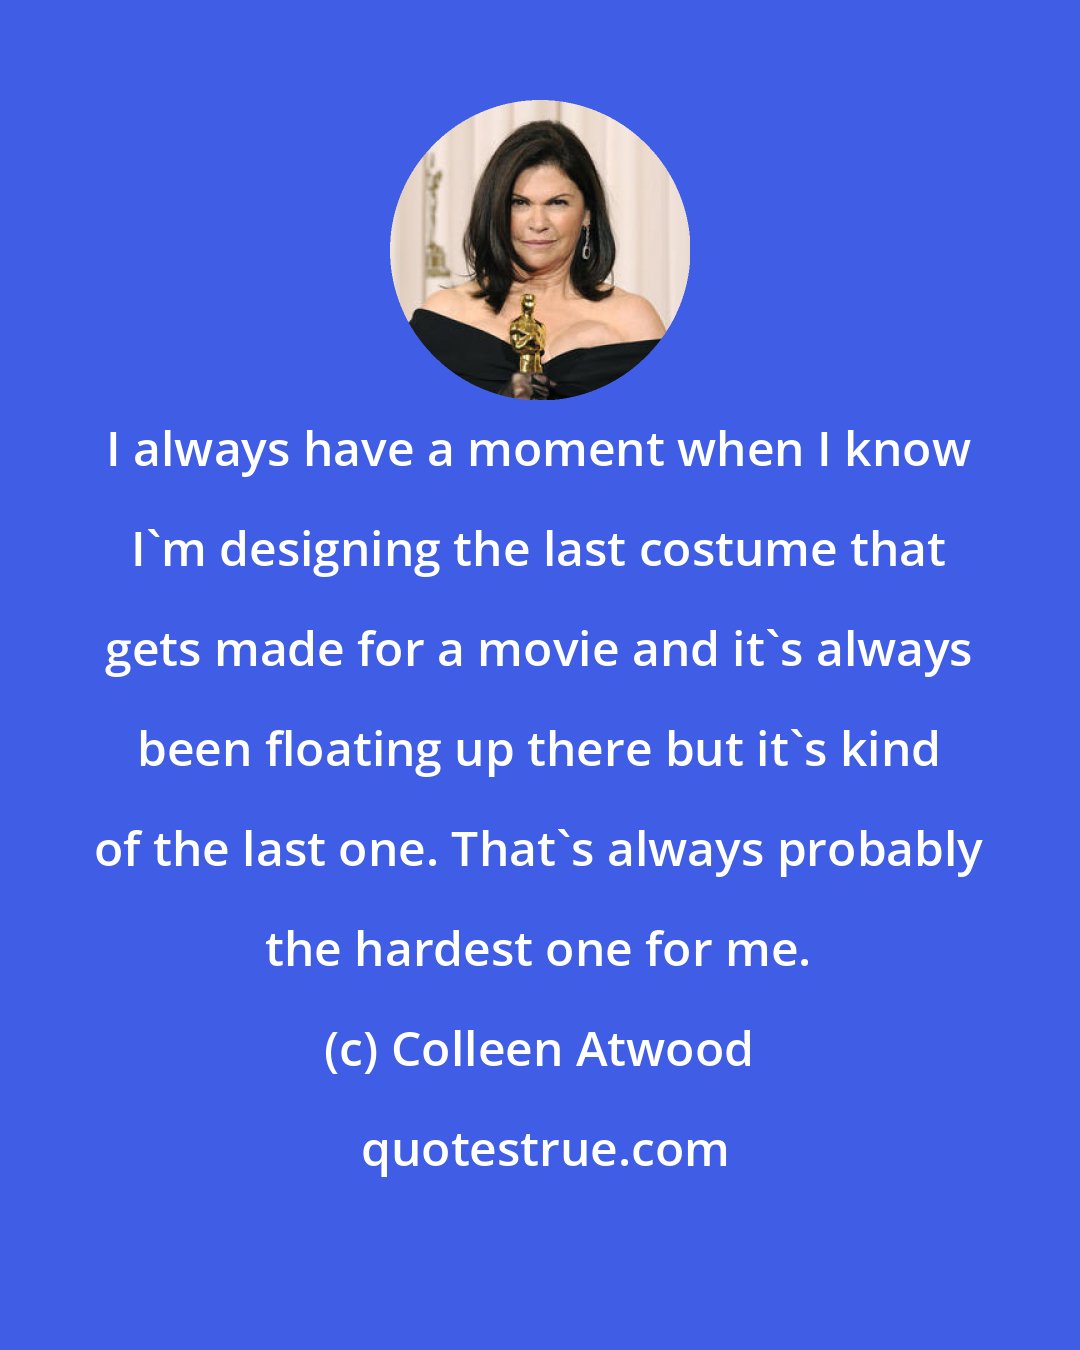 Colleen Atwood: I always have a moment when I know I'm designing the last costume that gets made for a movie and it's always been floating up there but it's kind of the last one. That's always probably the hardest one for me.